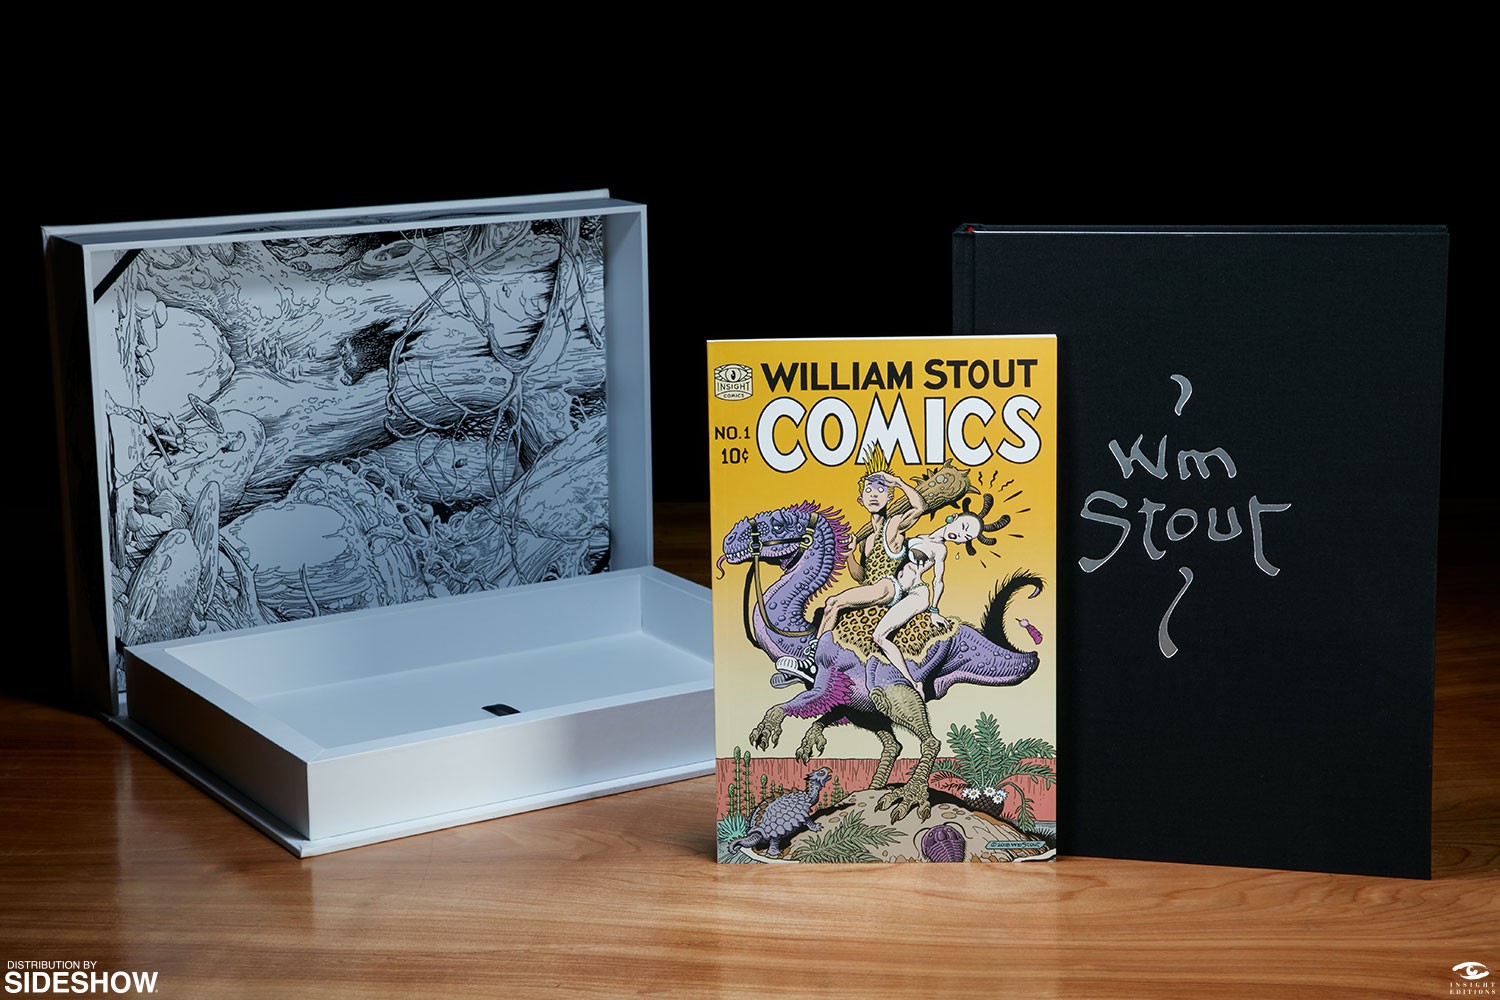 Fantastic Worlds The Art of William Stout (Prototype Shown) View 6